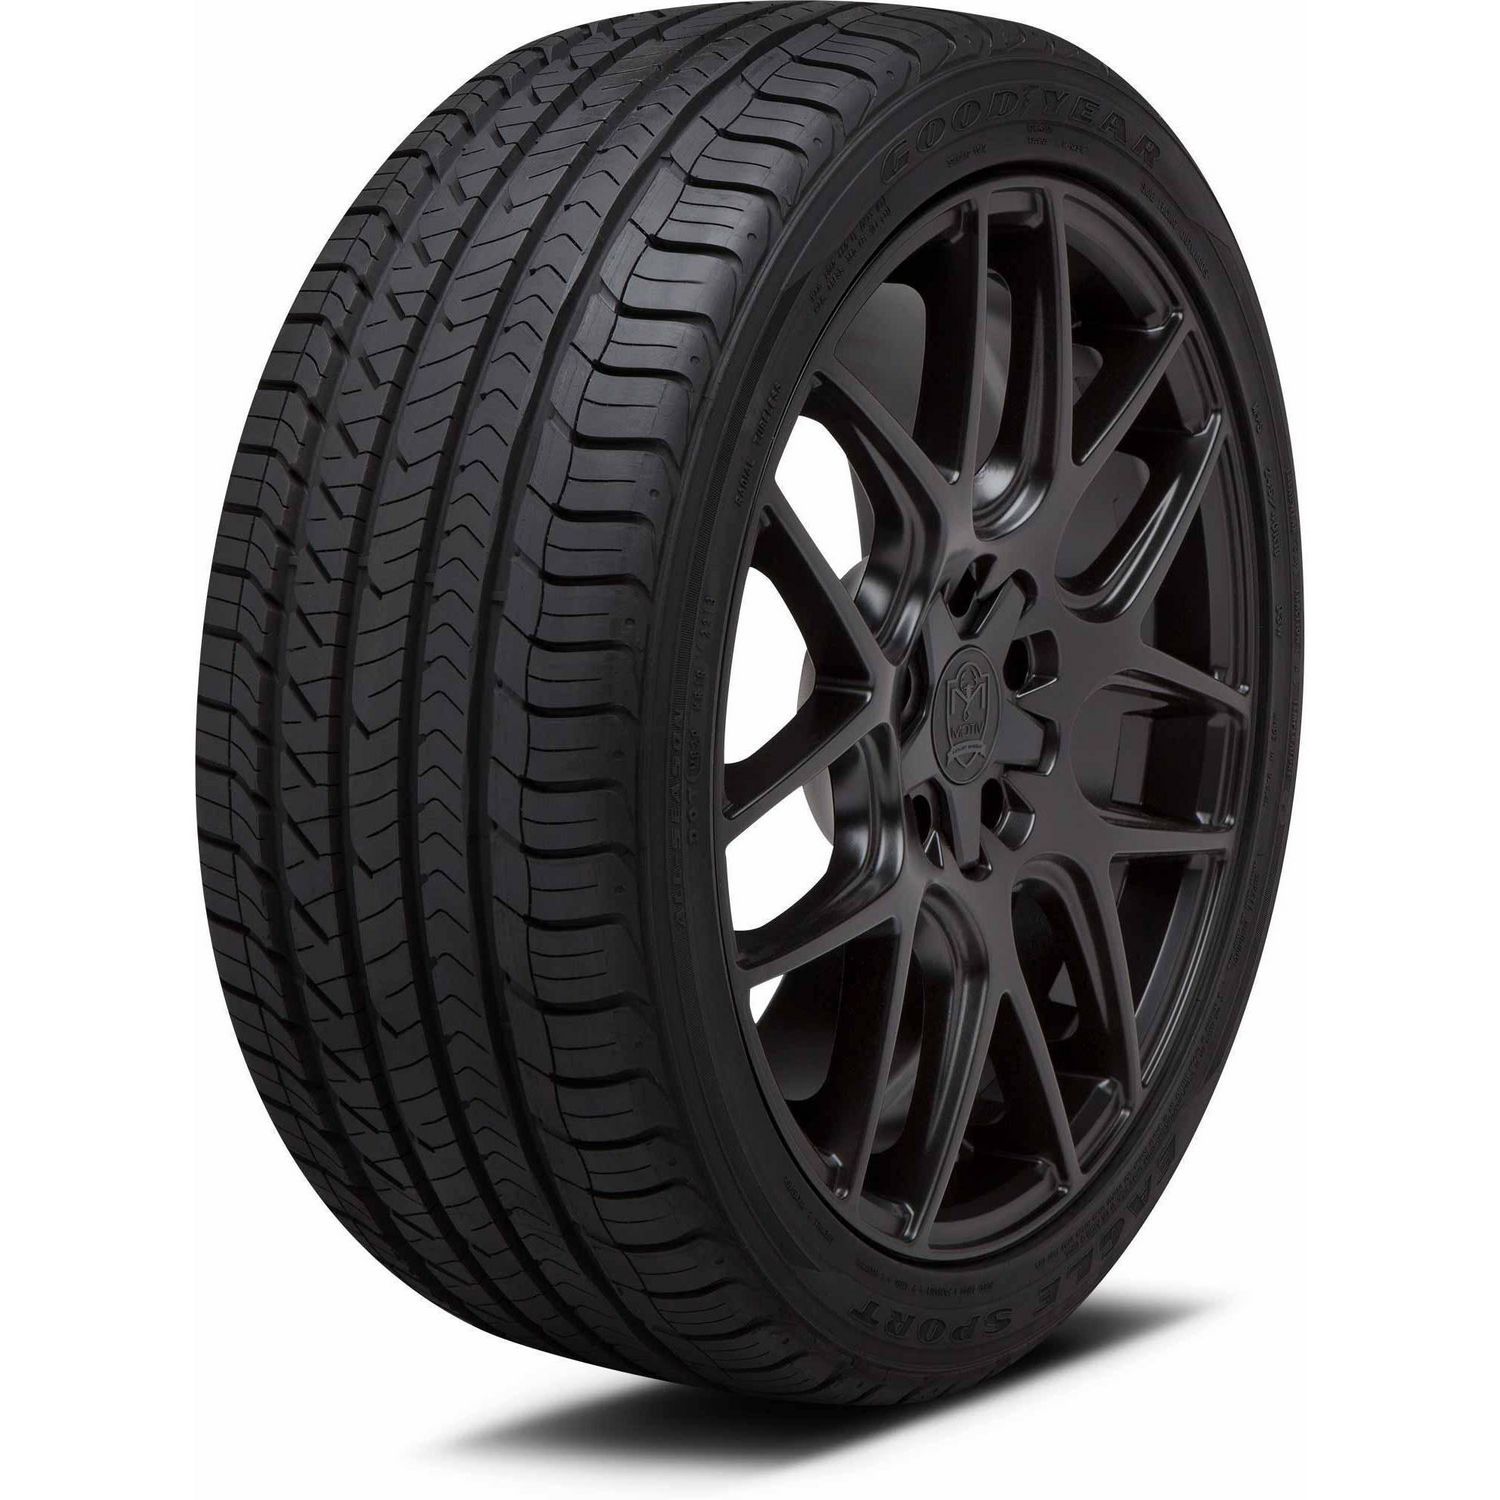 low-price-fast-shipping-1-x-new-goodyear-eagle-sport-all-season-235